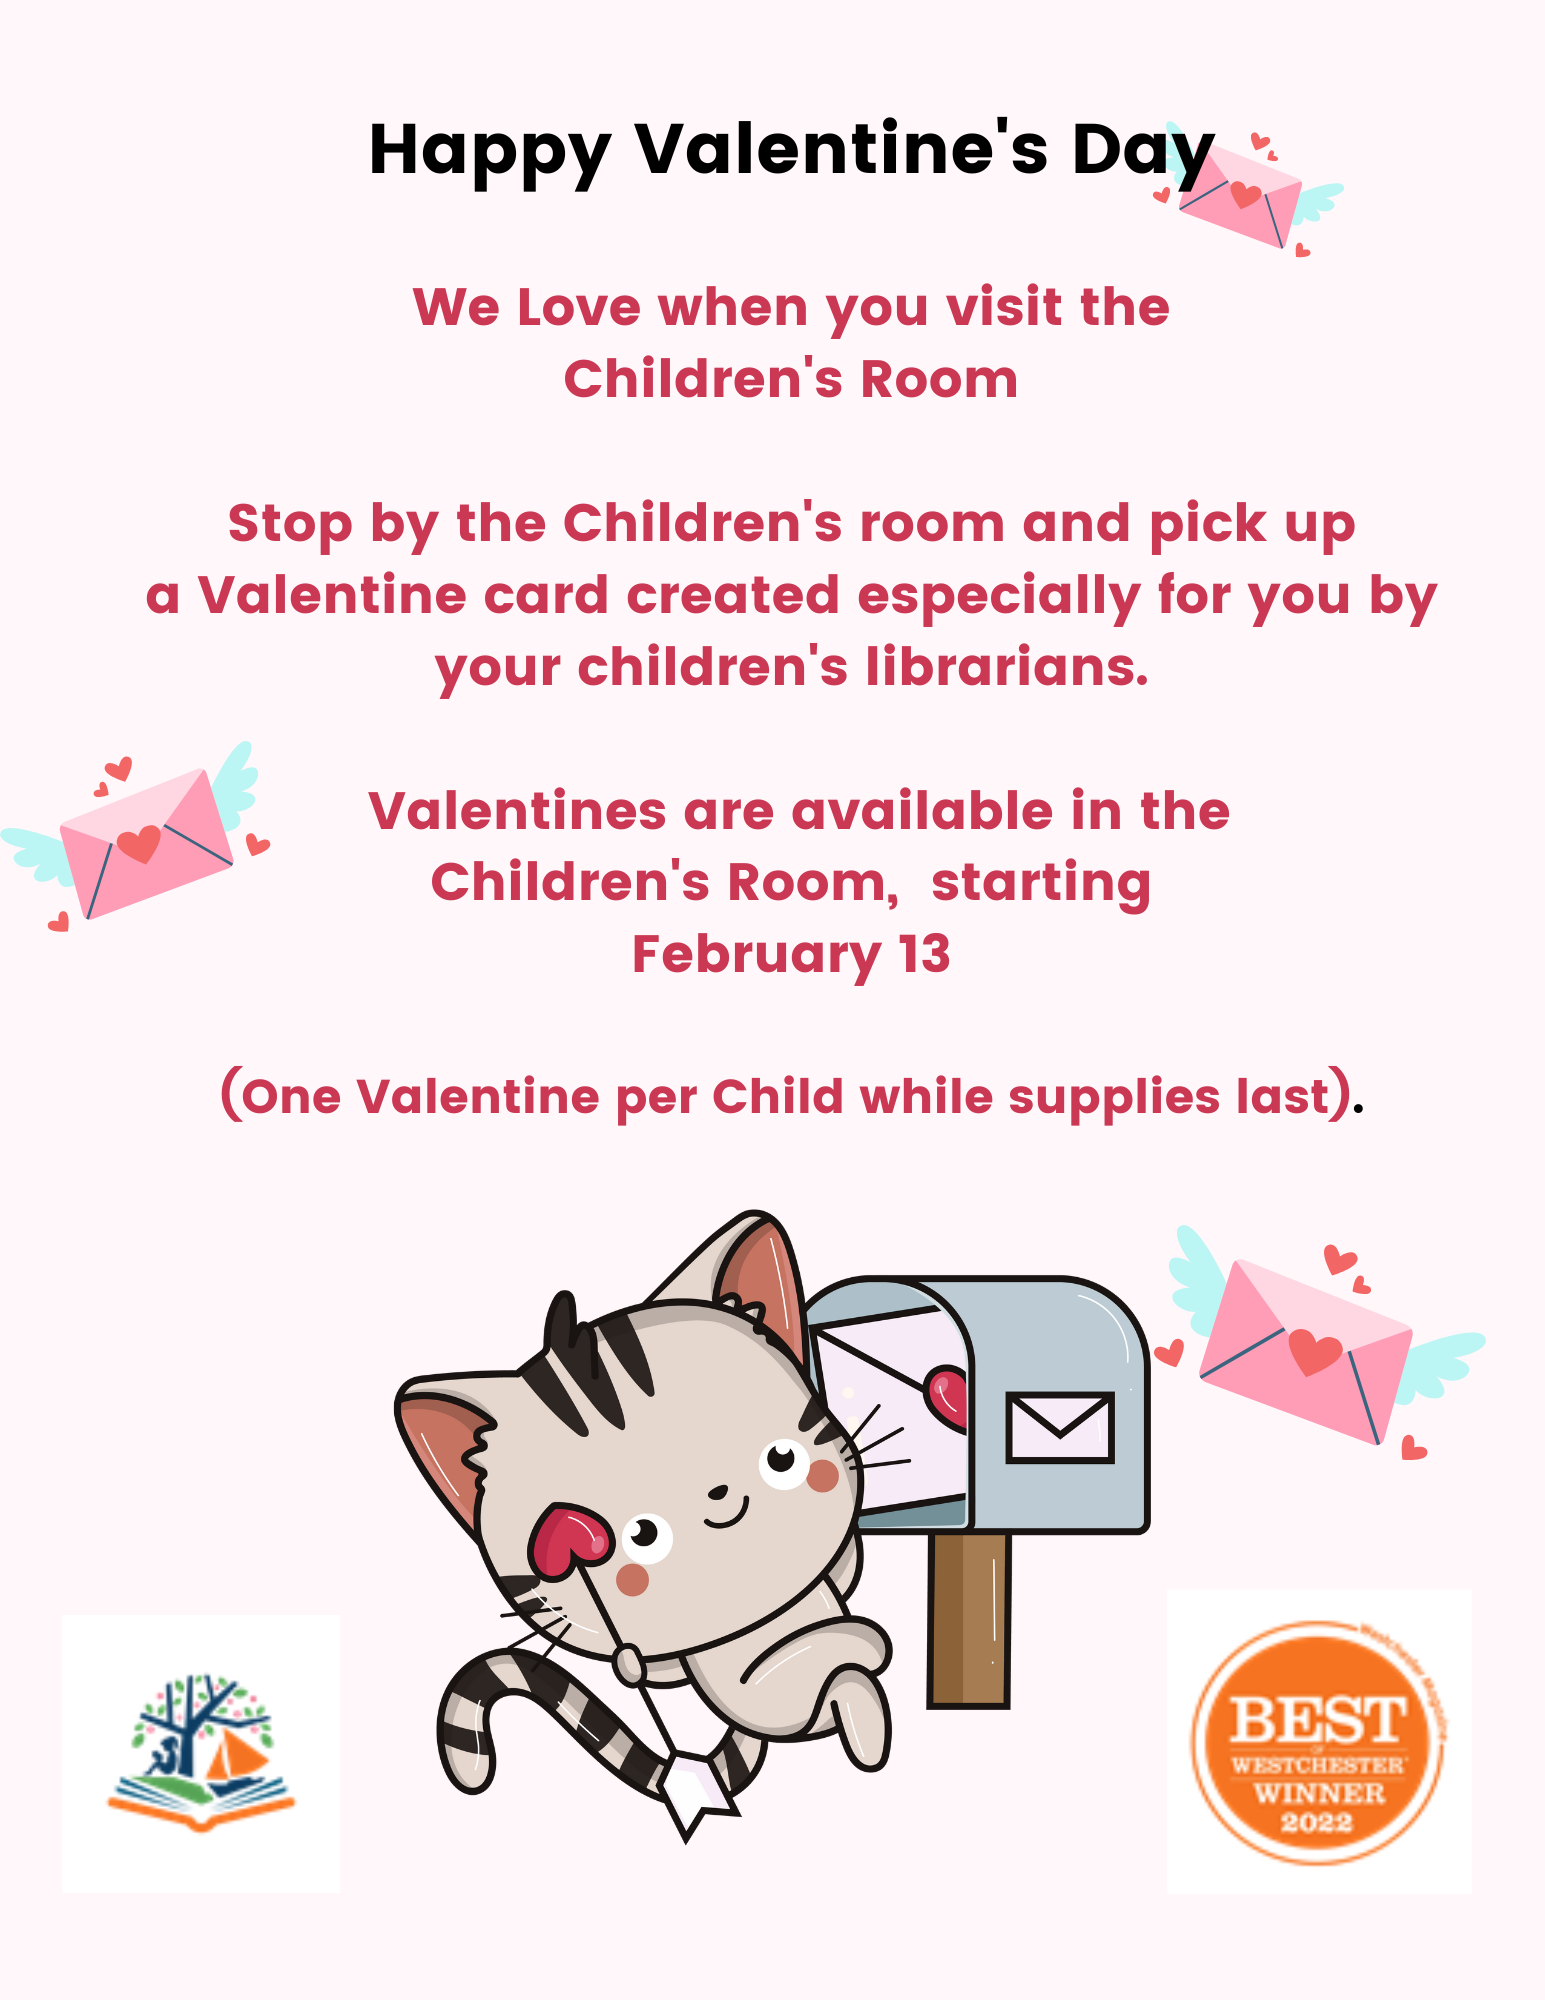 Valentine's card for children available in the children's room 2/13